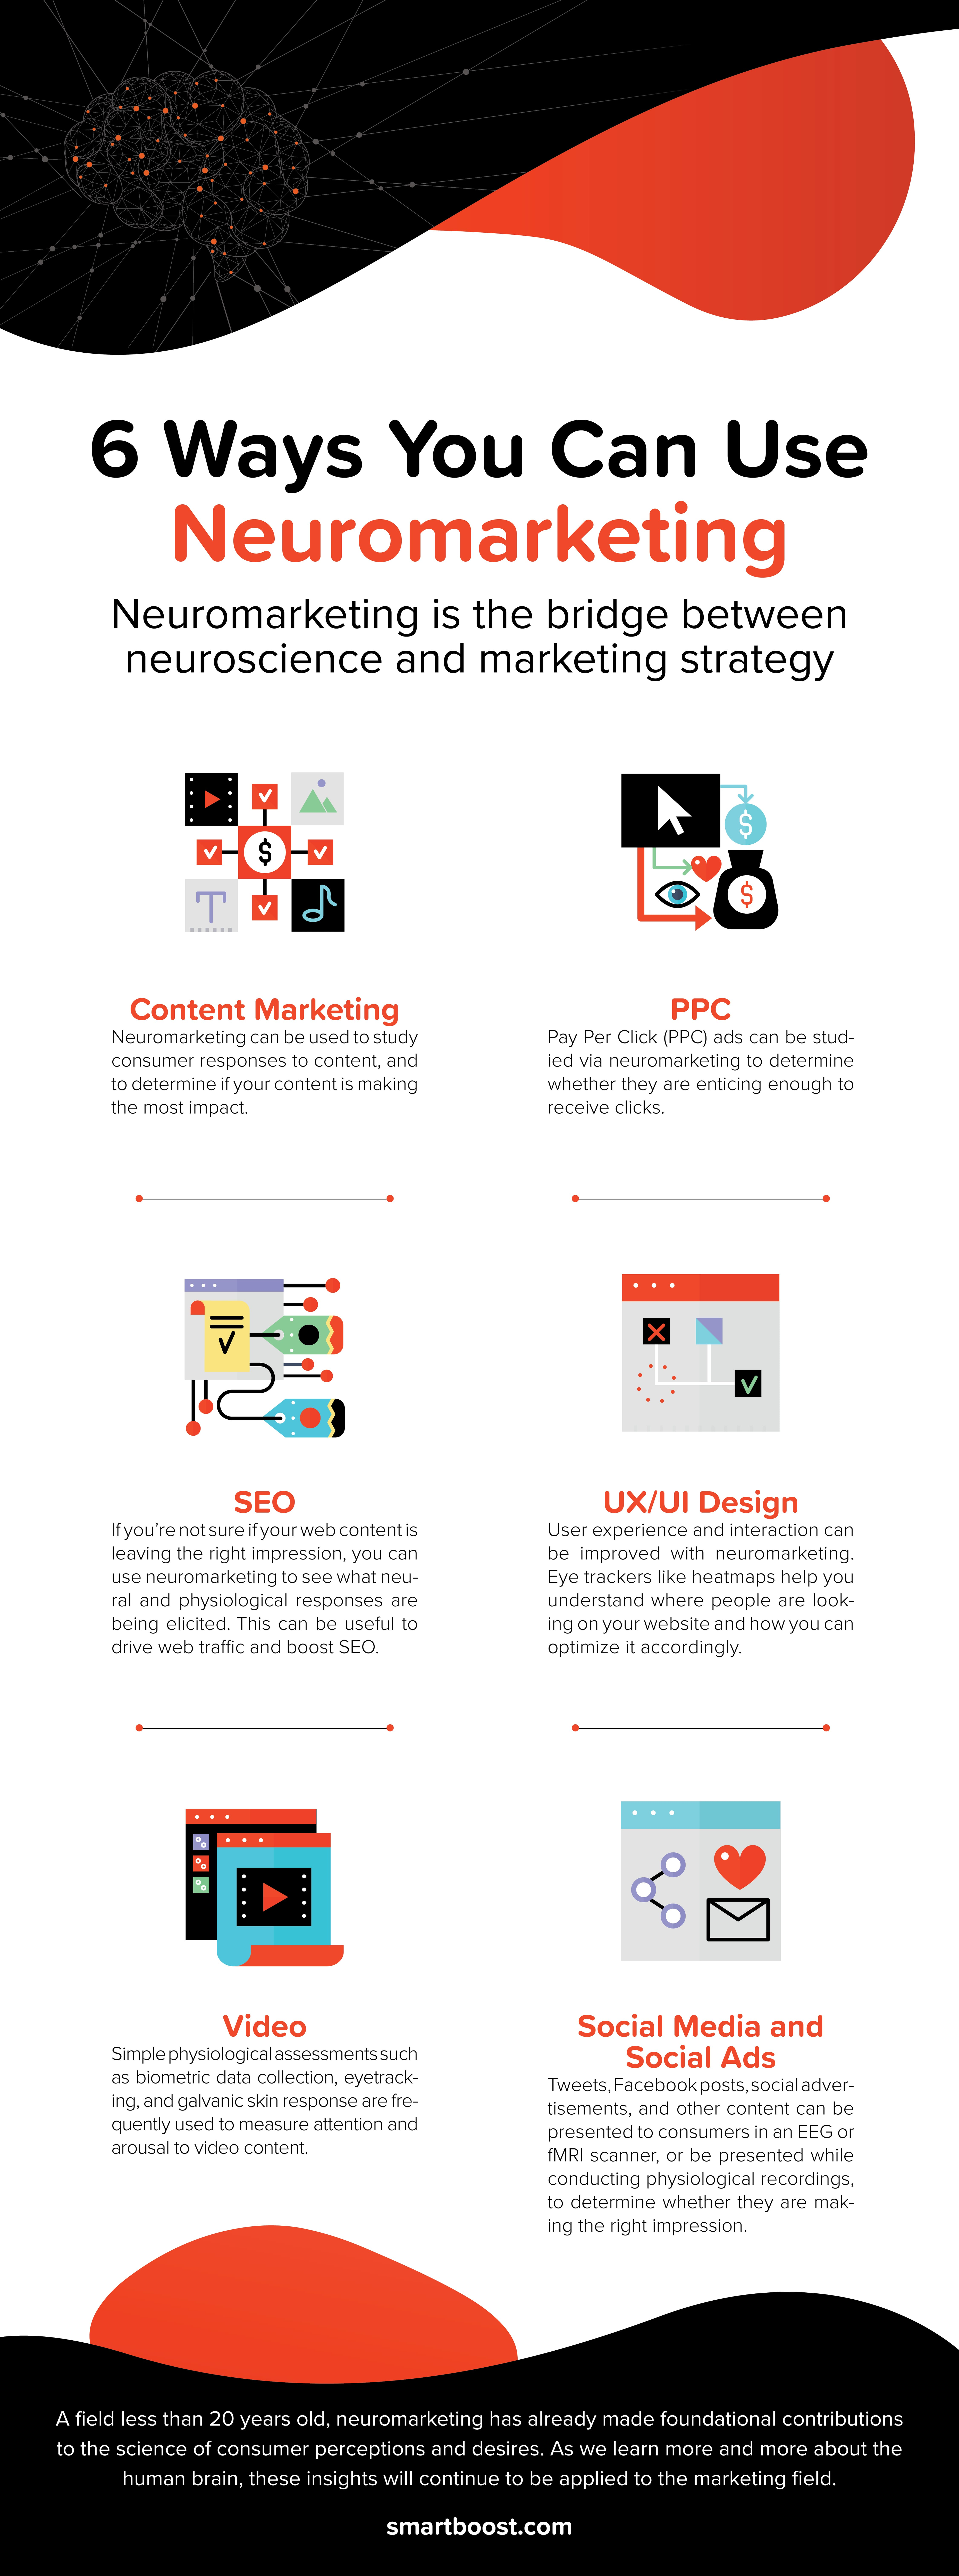 Growth Marketing Agency smarboost neuromarketing infographic 2